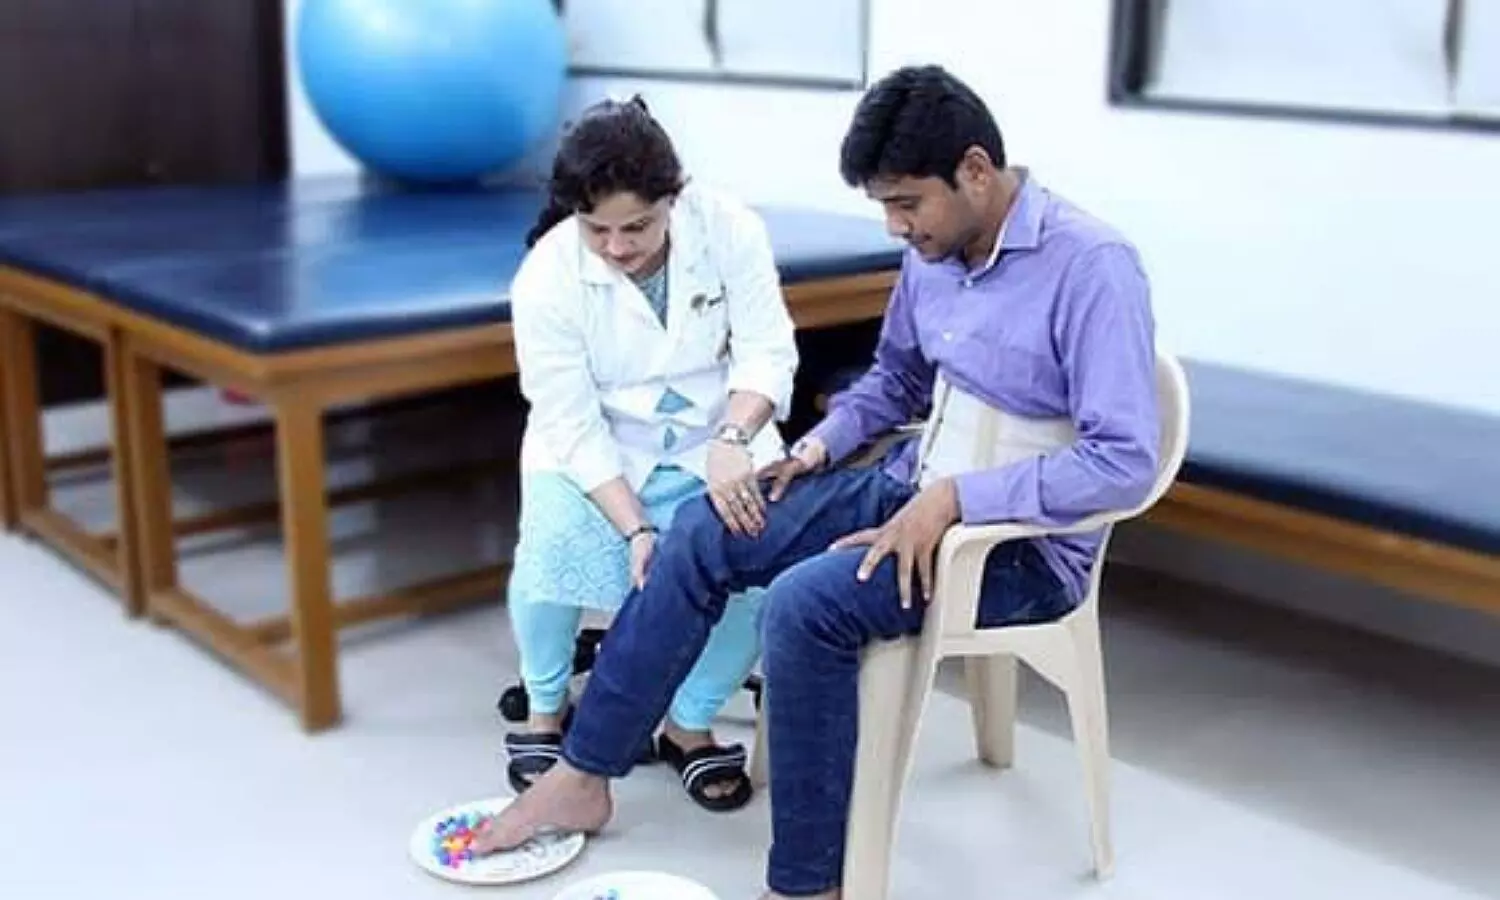 job opportunities in occupational therapy